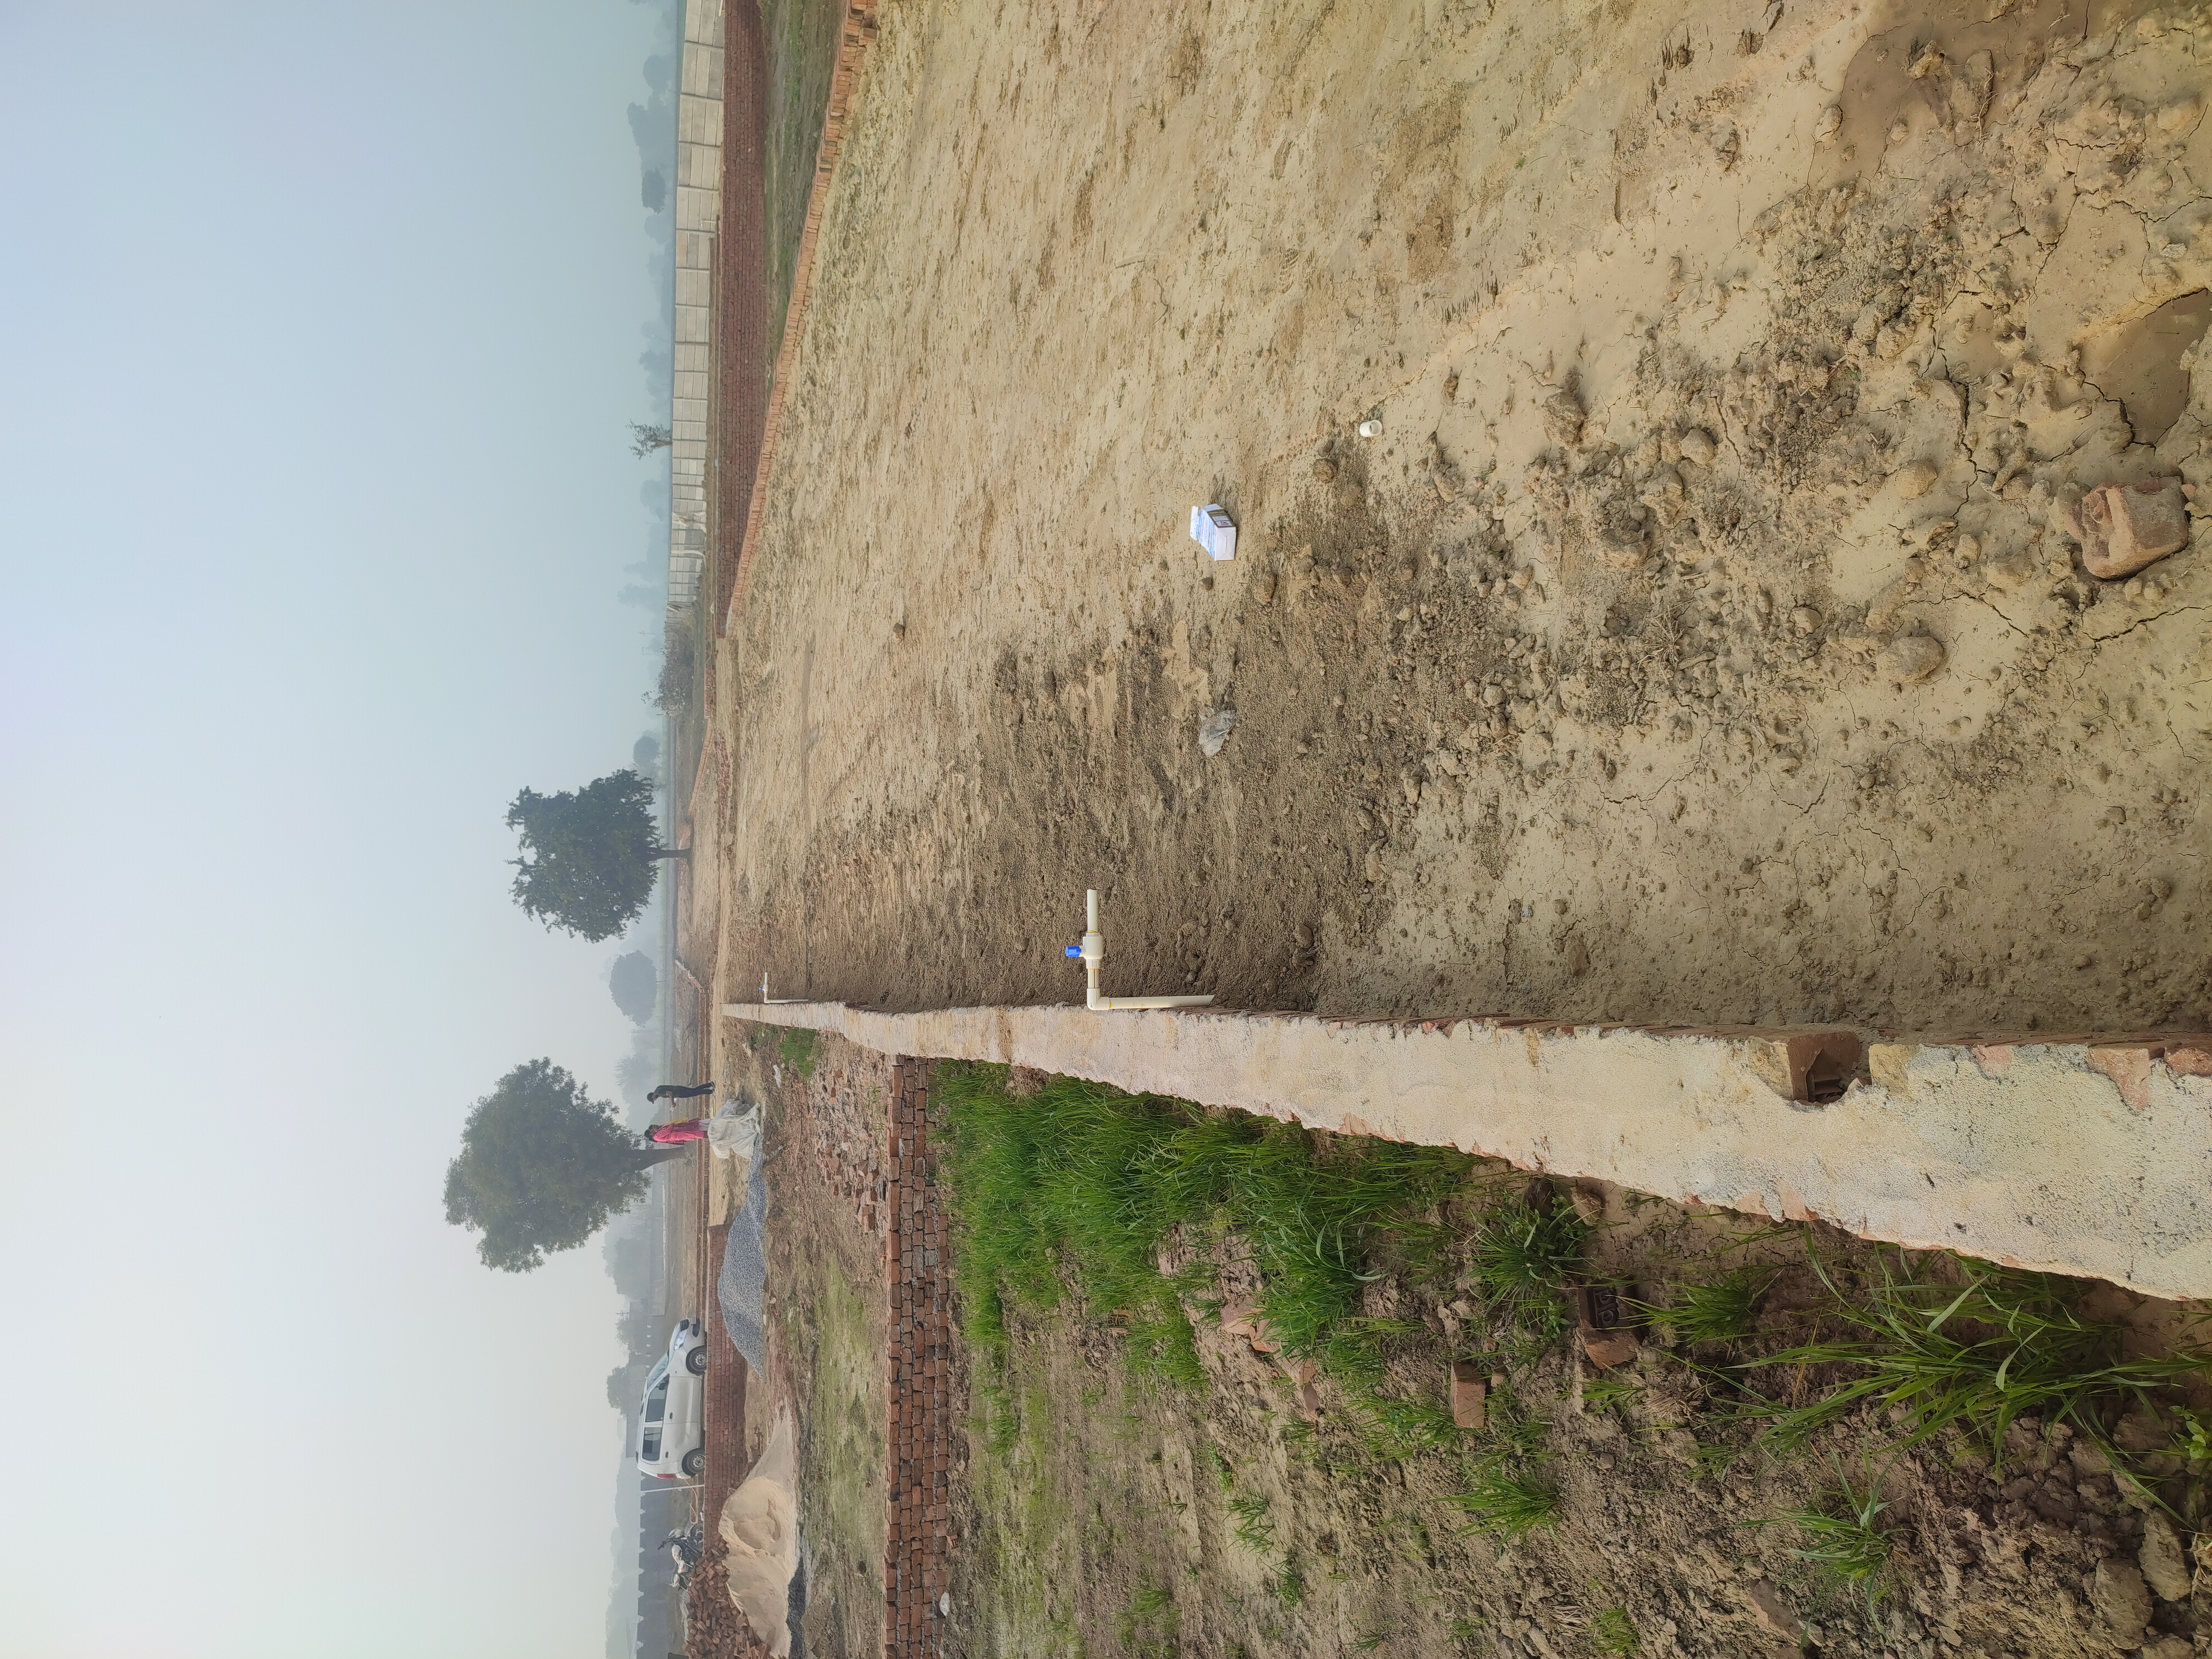 100 Sq Yards Plots & Land for Sale in Sector 17A